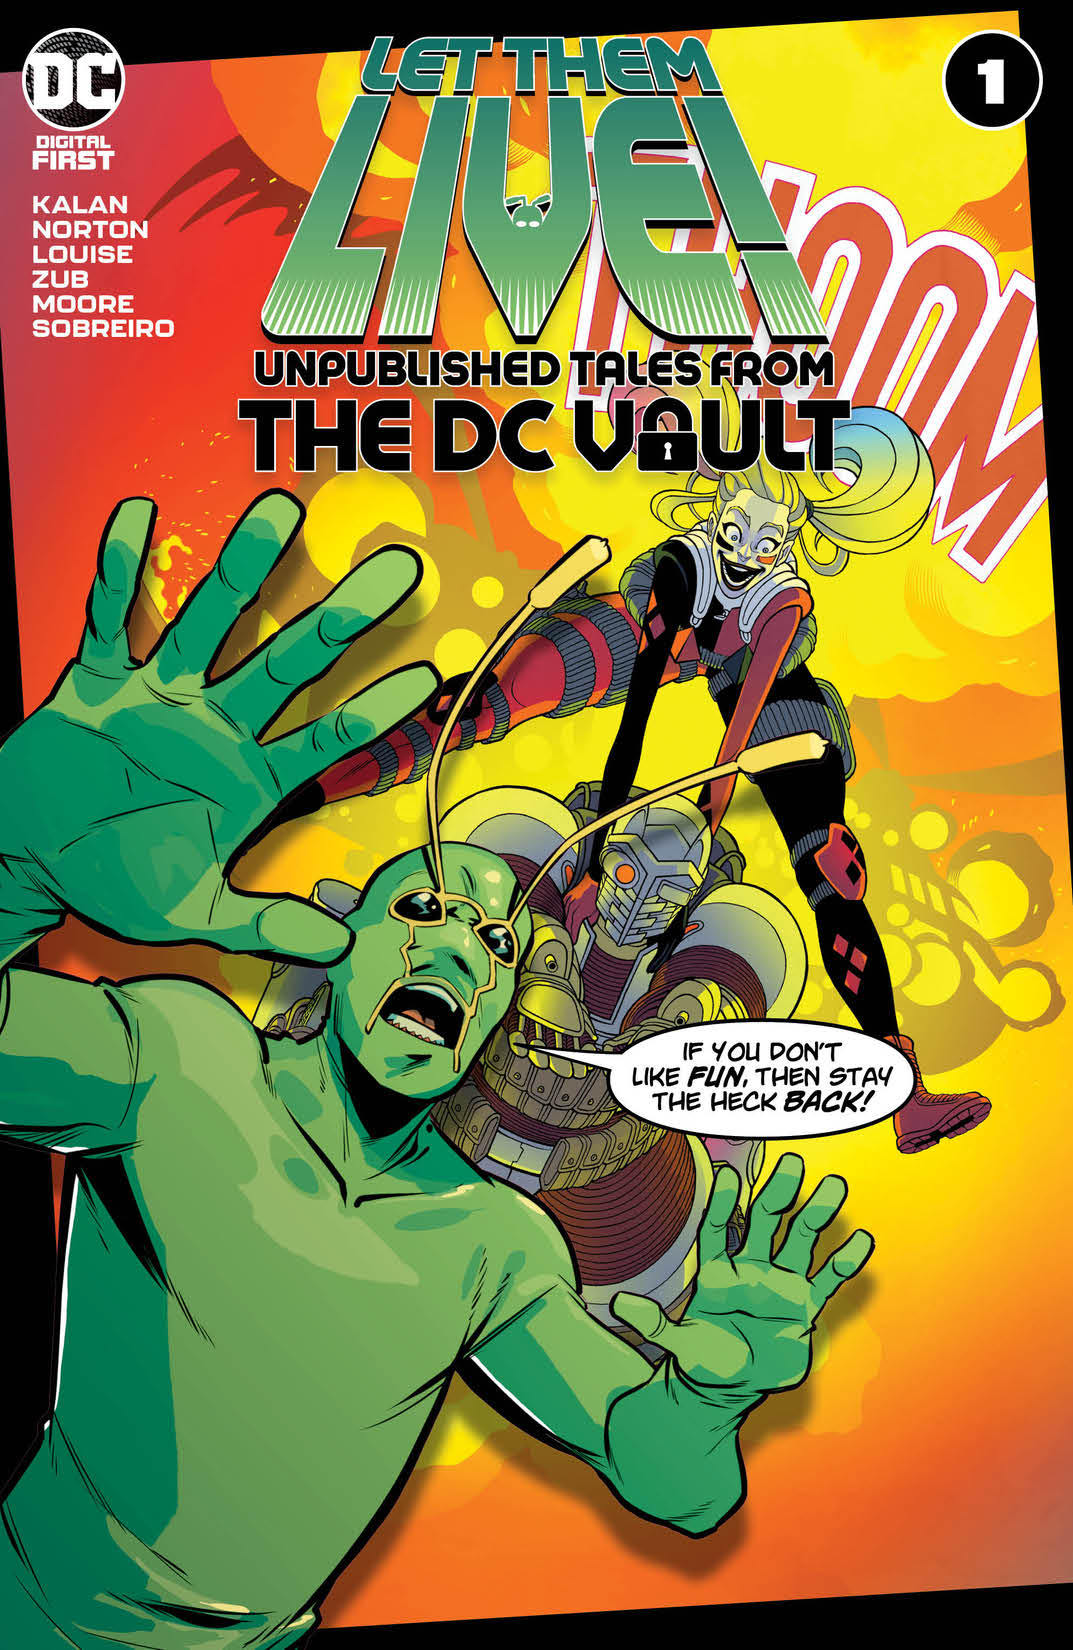 Let Them Live!: Unpublished Tales from the DC Vault #1 preview images